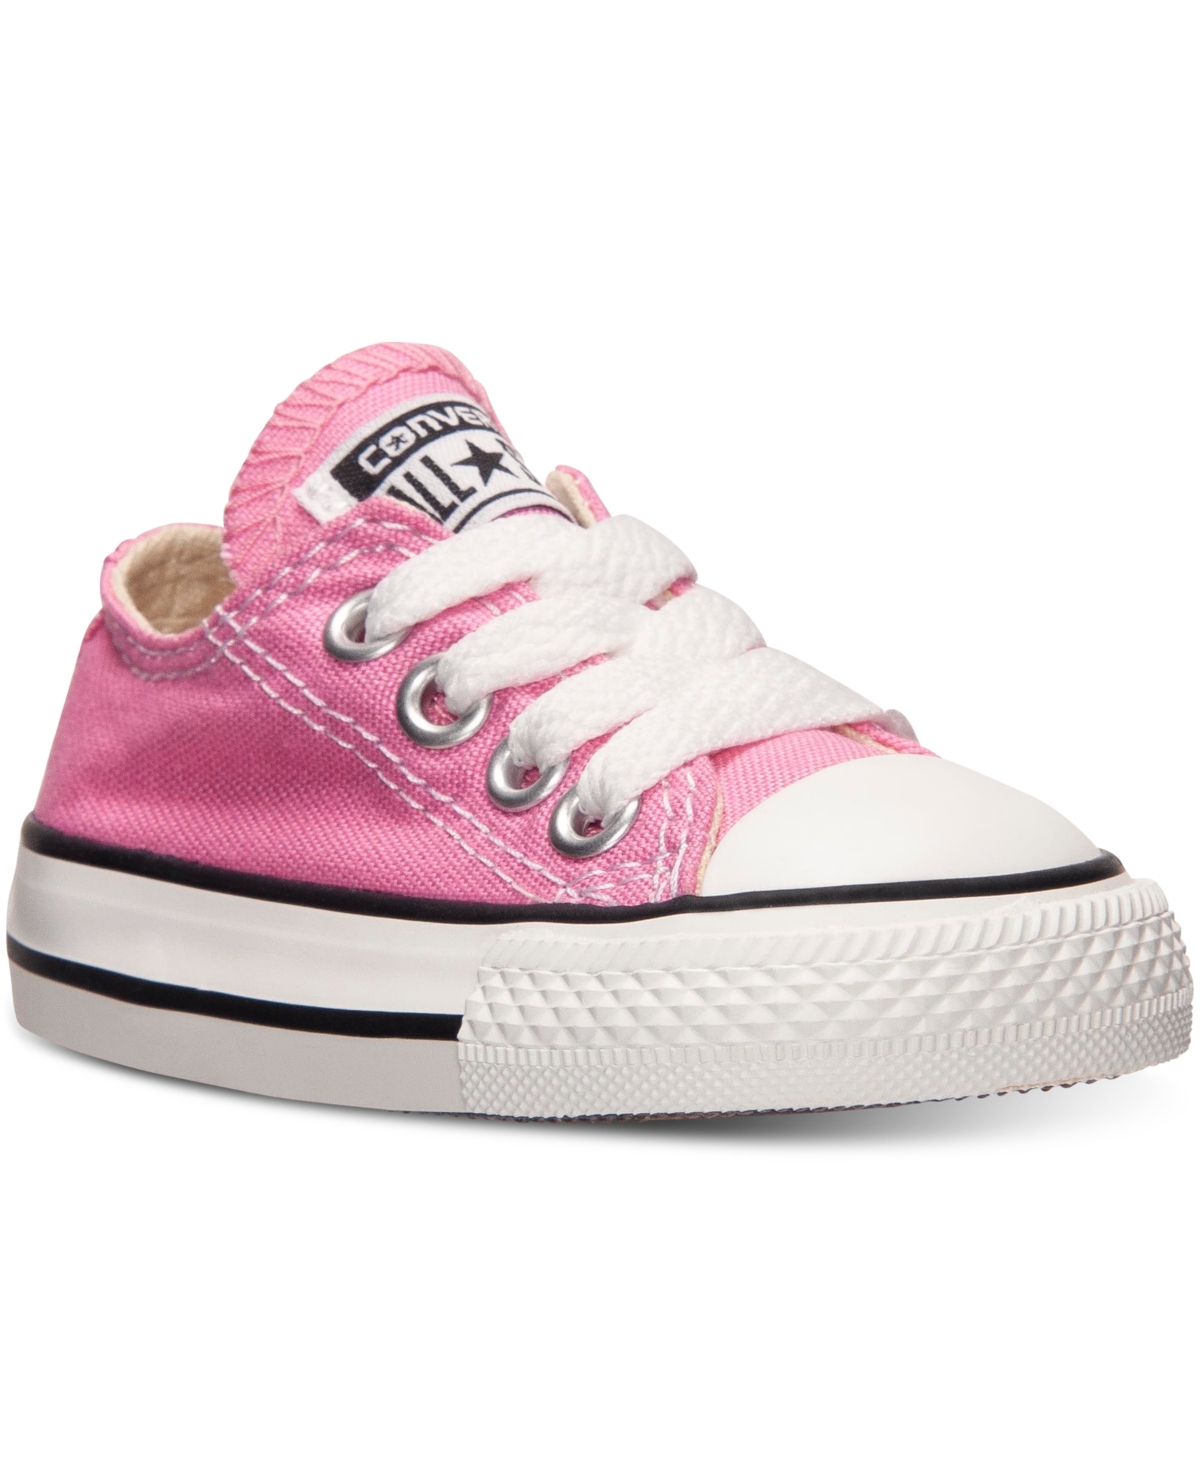 UPC 022866406345 product image for Toddler Chuck Taylor Original Sneakers from Finish Line | upcitemdb.com